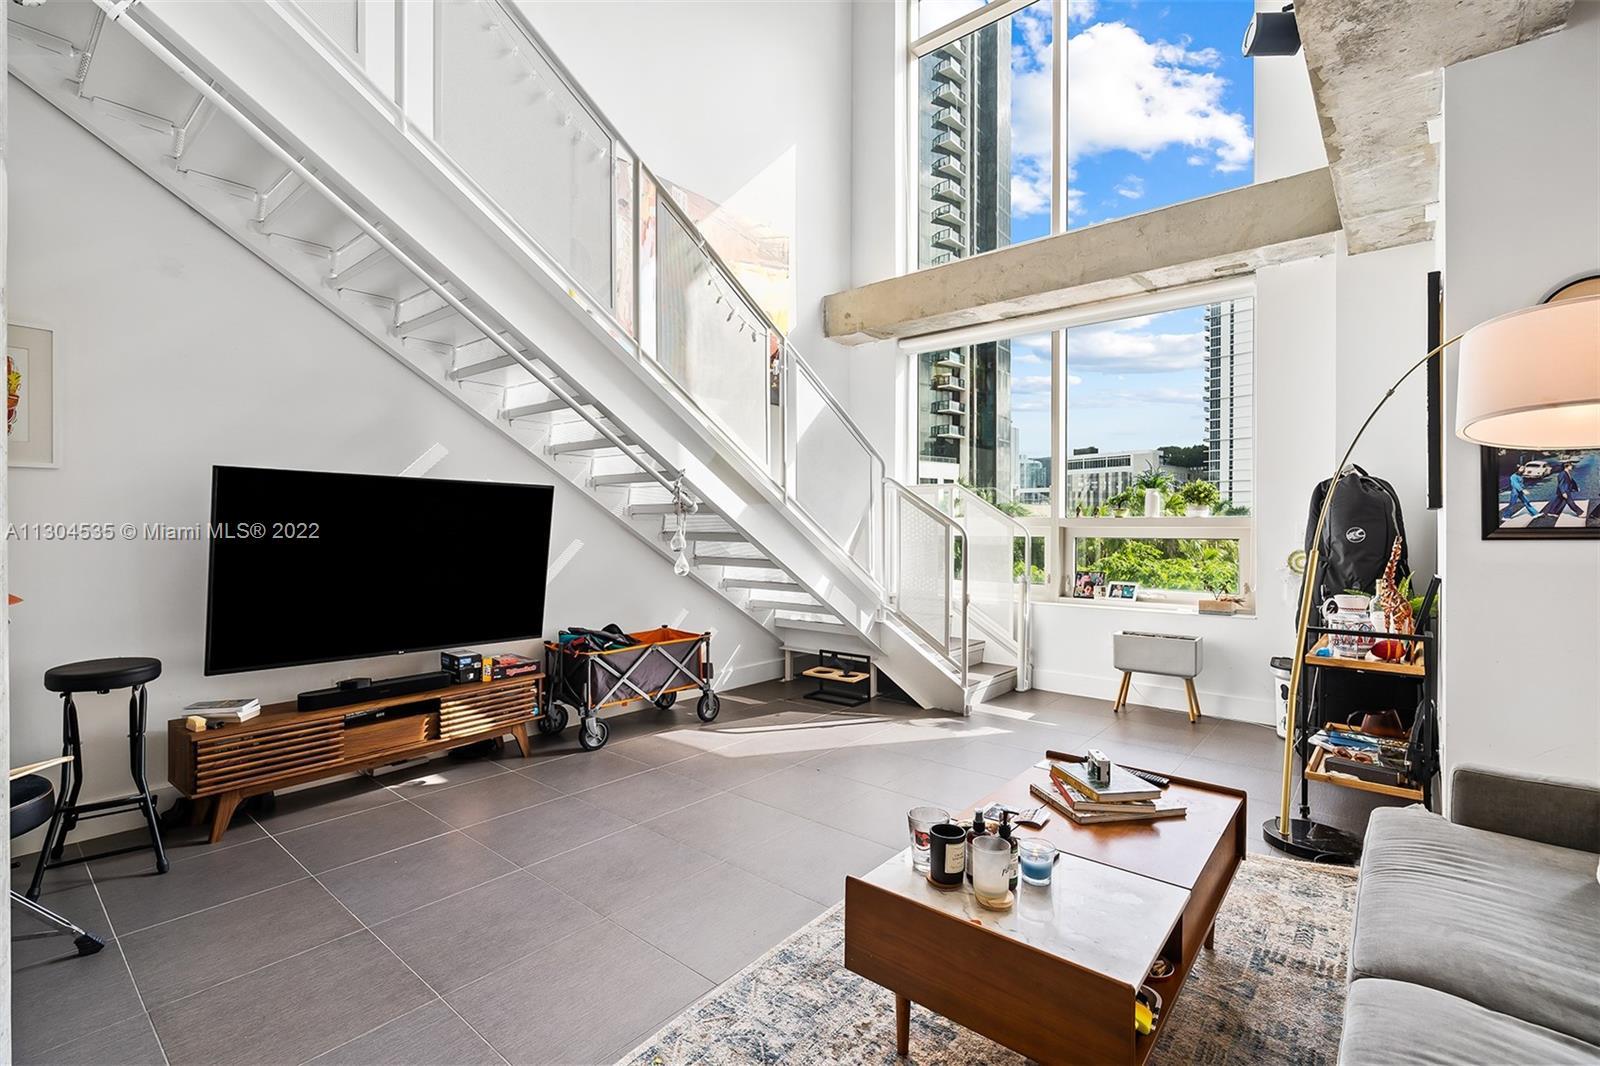 Exclusive Live-Work LOFT (residence/office/rental/AirBnB) in the heart of Midtown District. Third fl